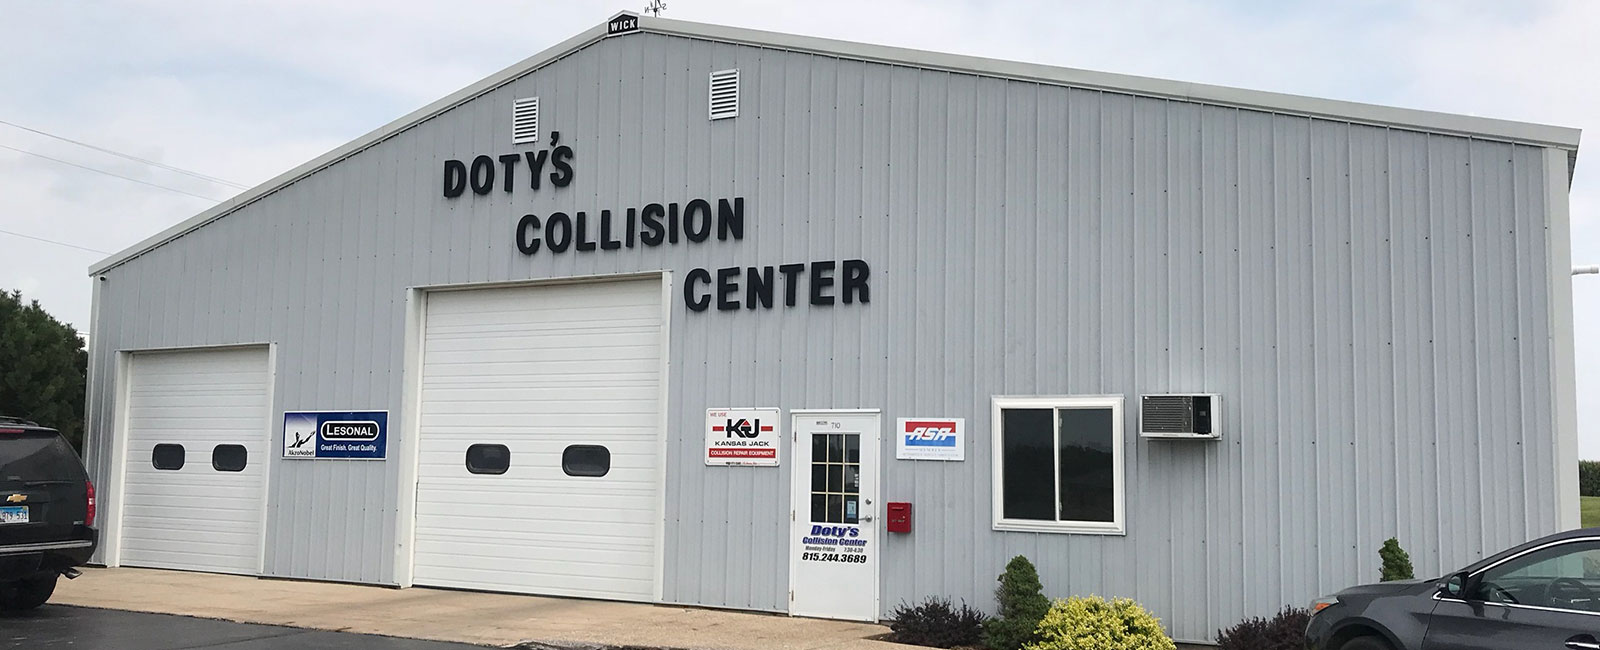 Doty's Collision Center